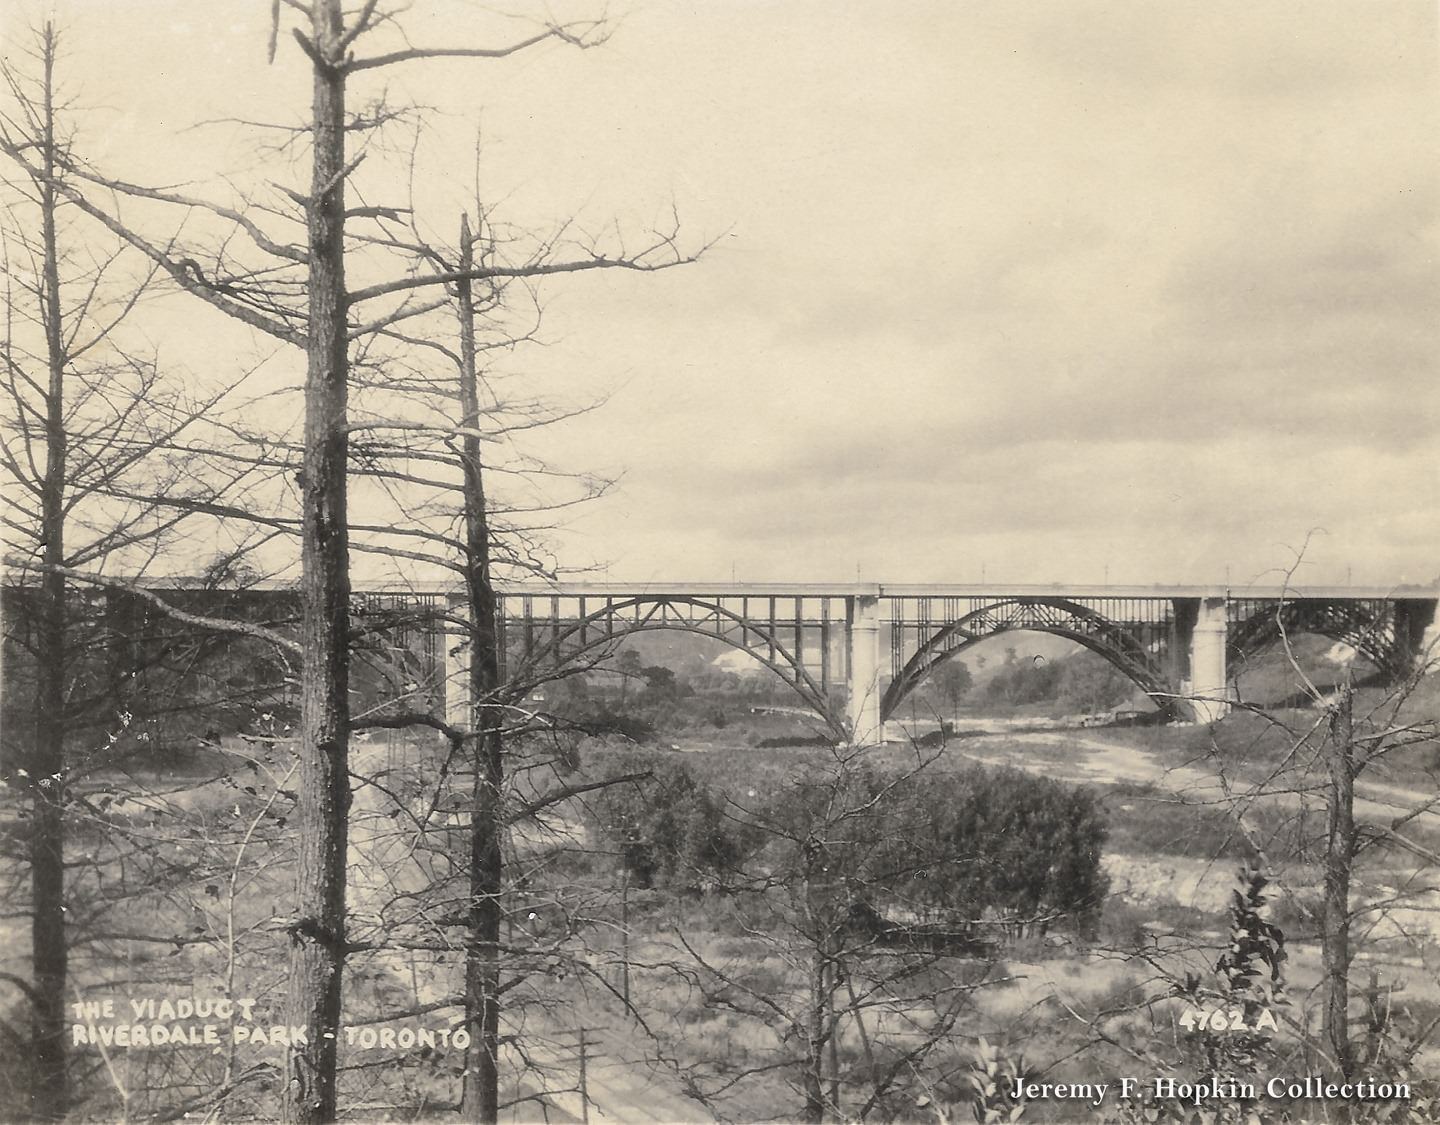 Looking north to the Prince Edward Viaduct from Riverdale Park, 1920.